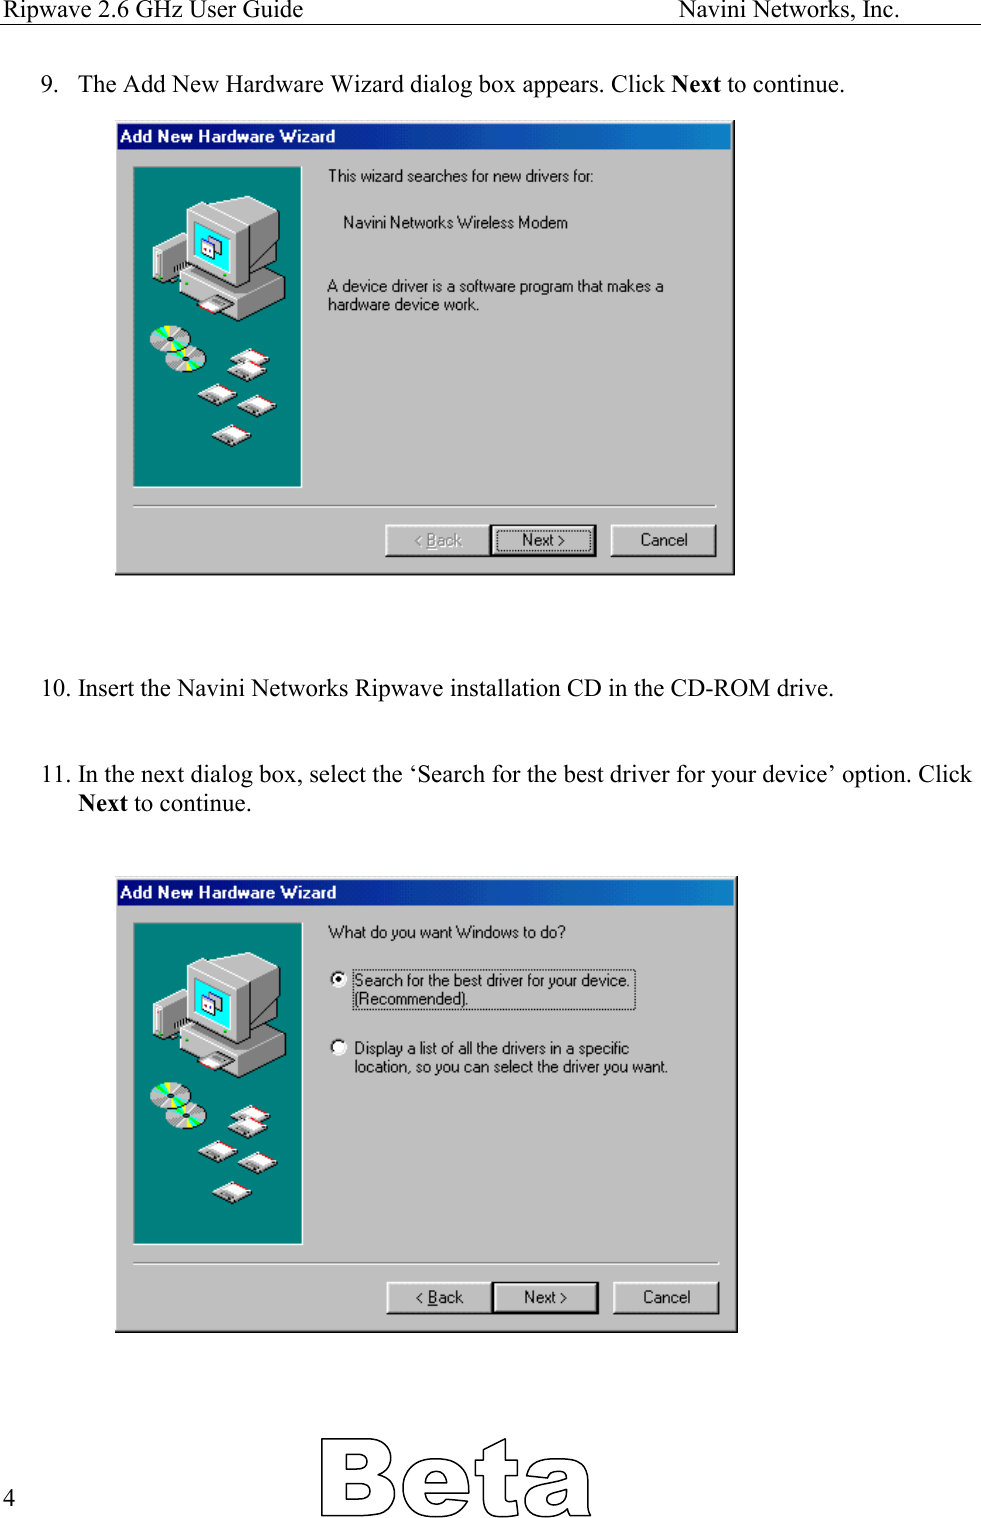 Ripwave 2.6 GHz User Guide                                                            Navini Networks, Inc. 9.  The Add New Hardware Wizard dialog box appears. Click Next to continue.                     10. Insert the Navini Networks Ripwave installation CD in the CD-ROM drive.    11. In the next dialog box, select the ‘Search for the best driver for your device’ option. Click Next to continue.                         4